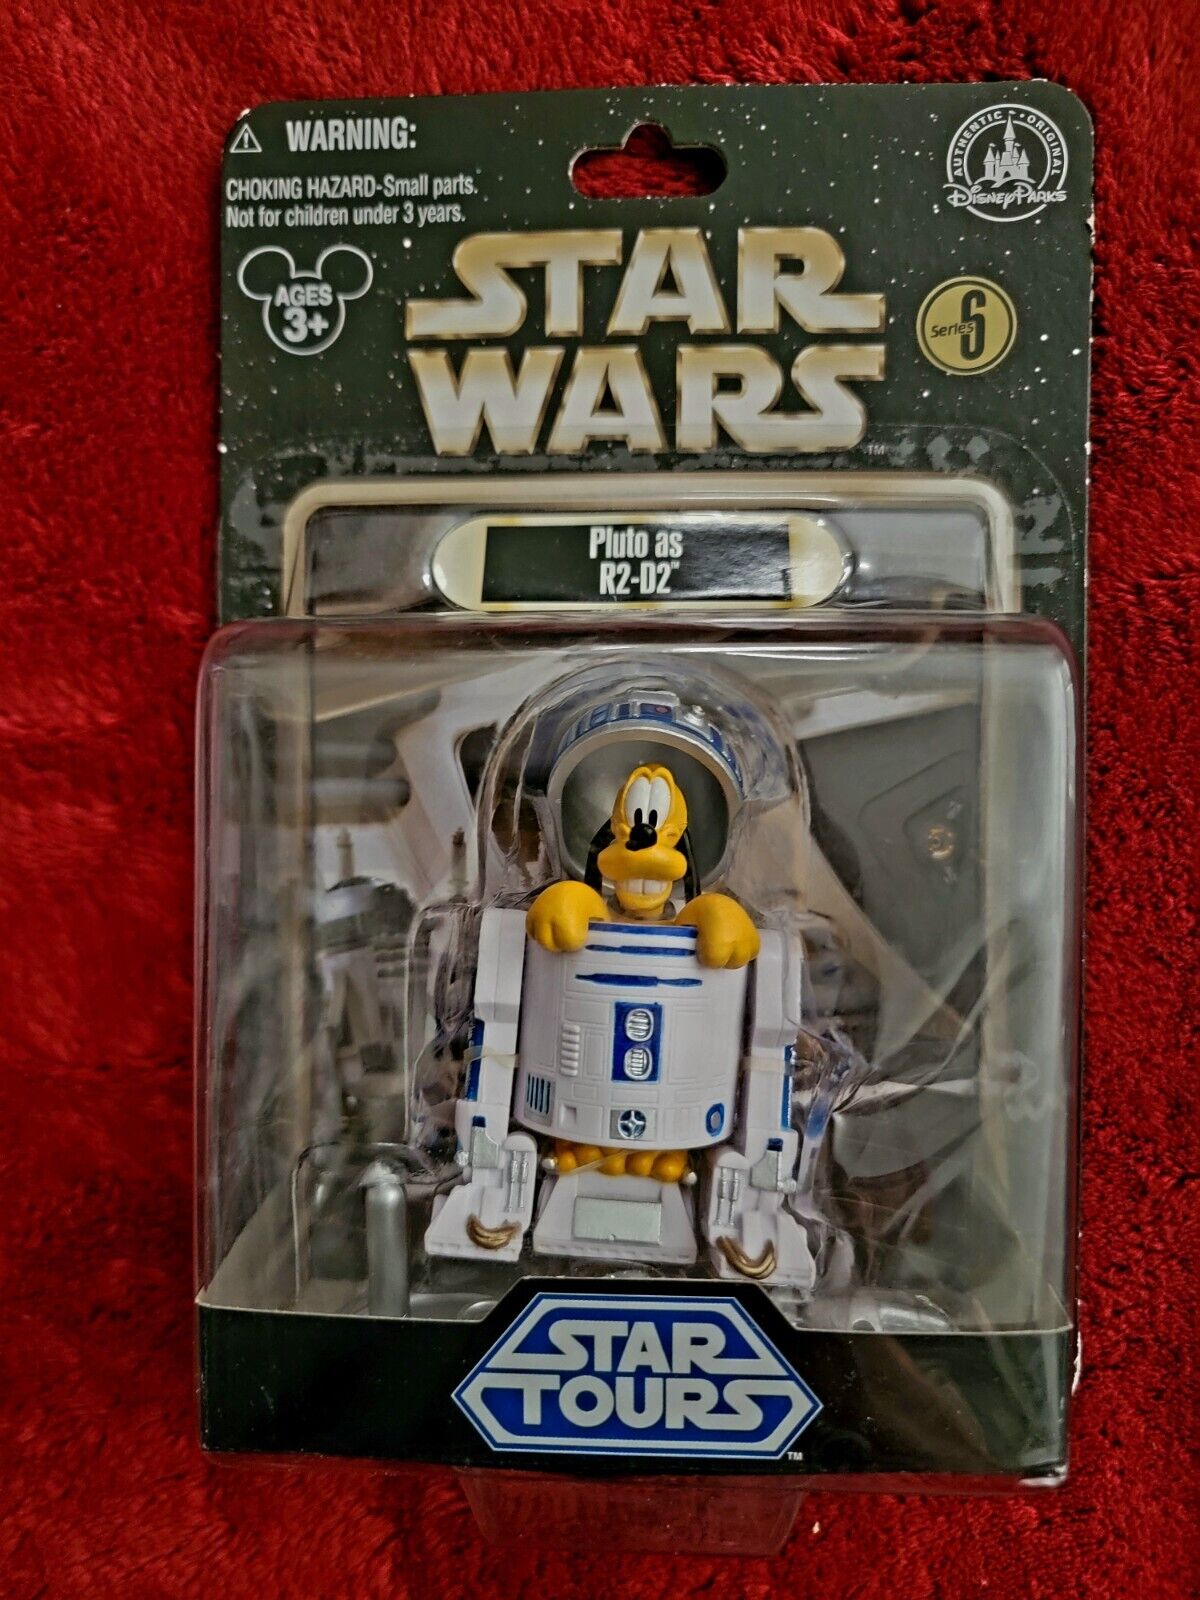 Rare Star Wars Disney Parks Exclusive Pluto R2-D2 figure Limited Edition Vaulted